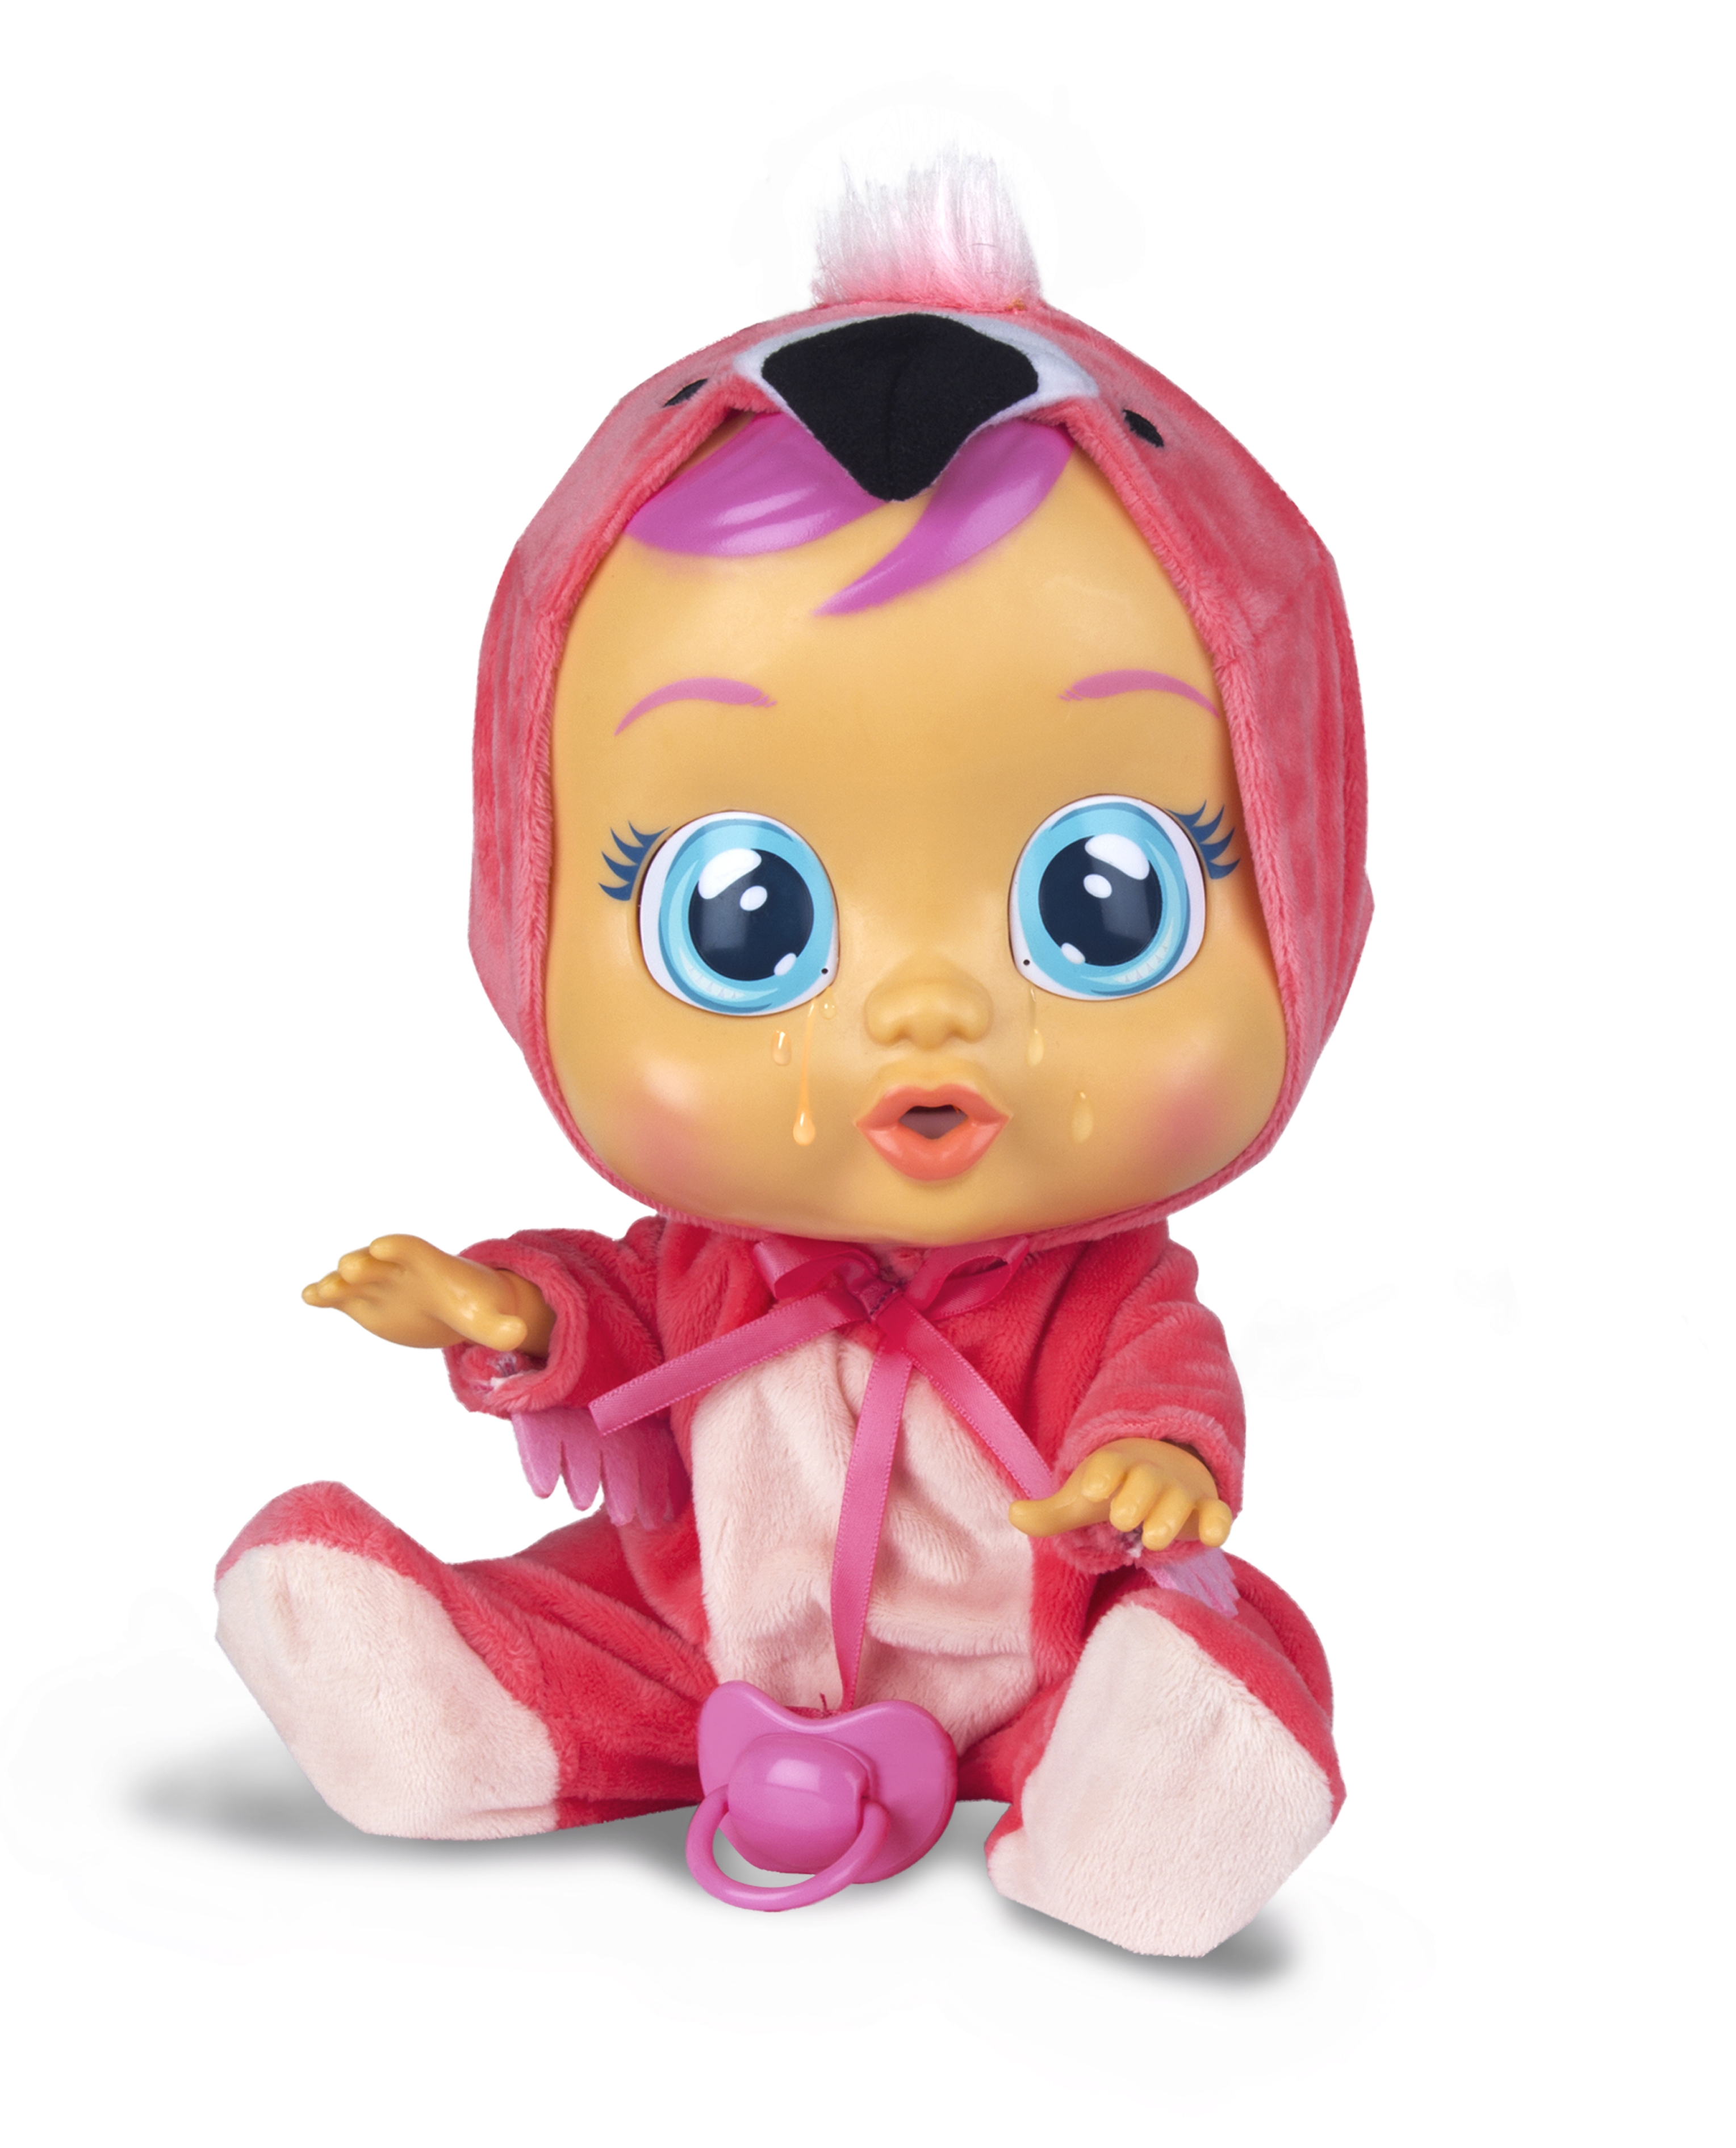 Cry Babies Fancy Doll - image 1 of 6